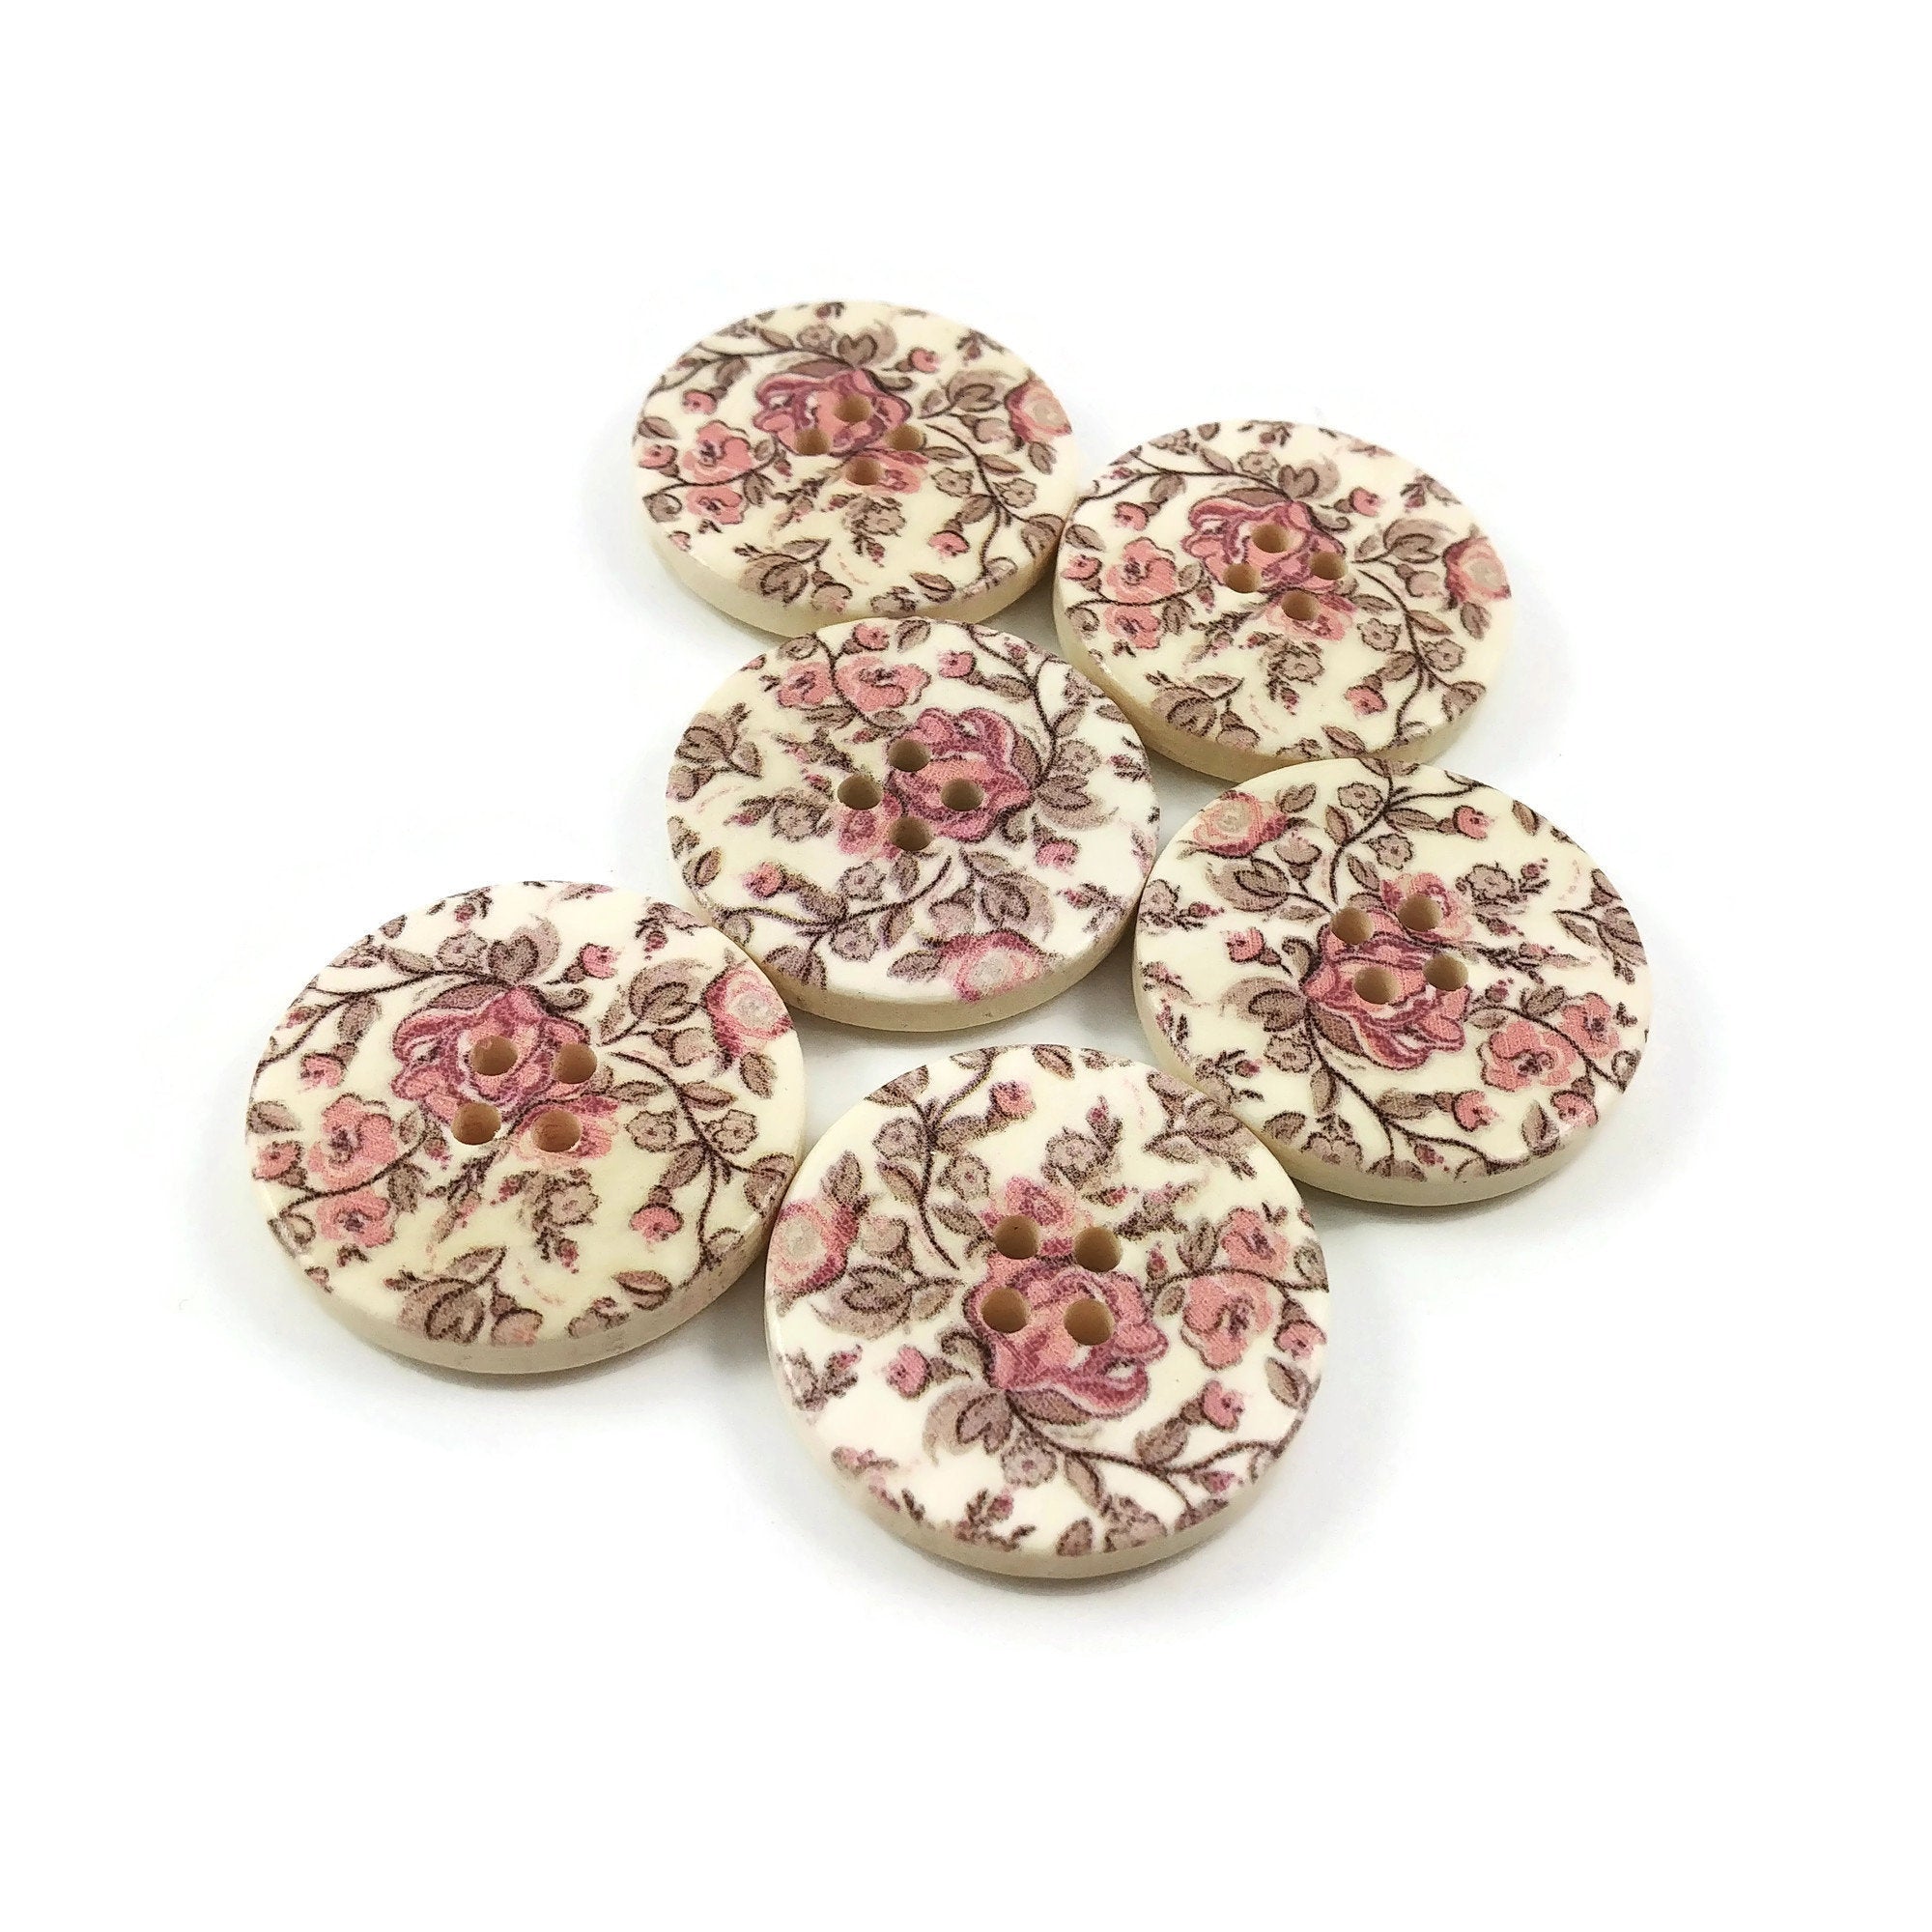 Roses and Foliage Pattern Wooden Sewing Button 30mm - set of 6 wood buttons 